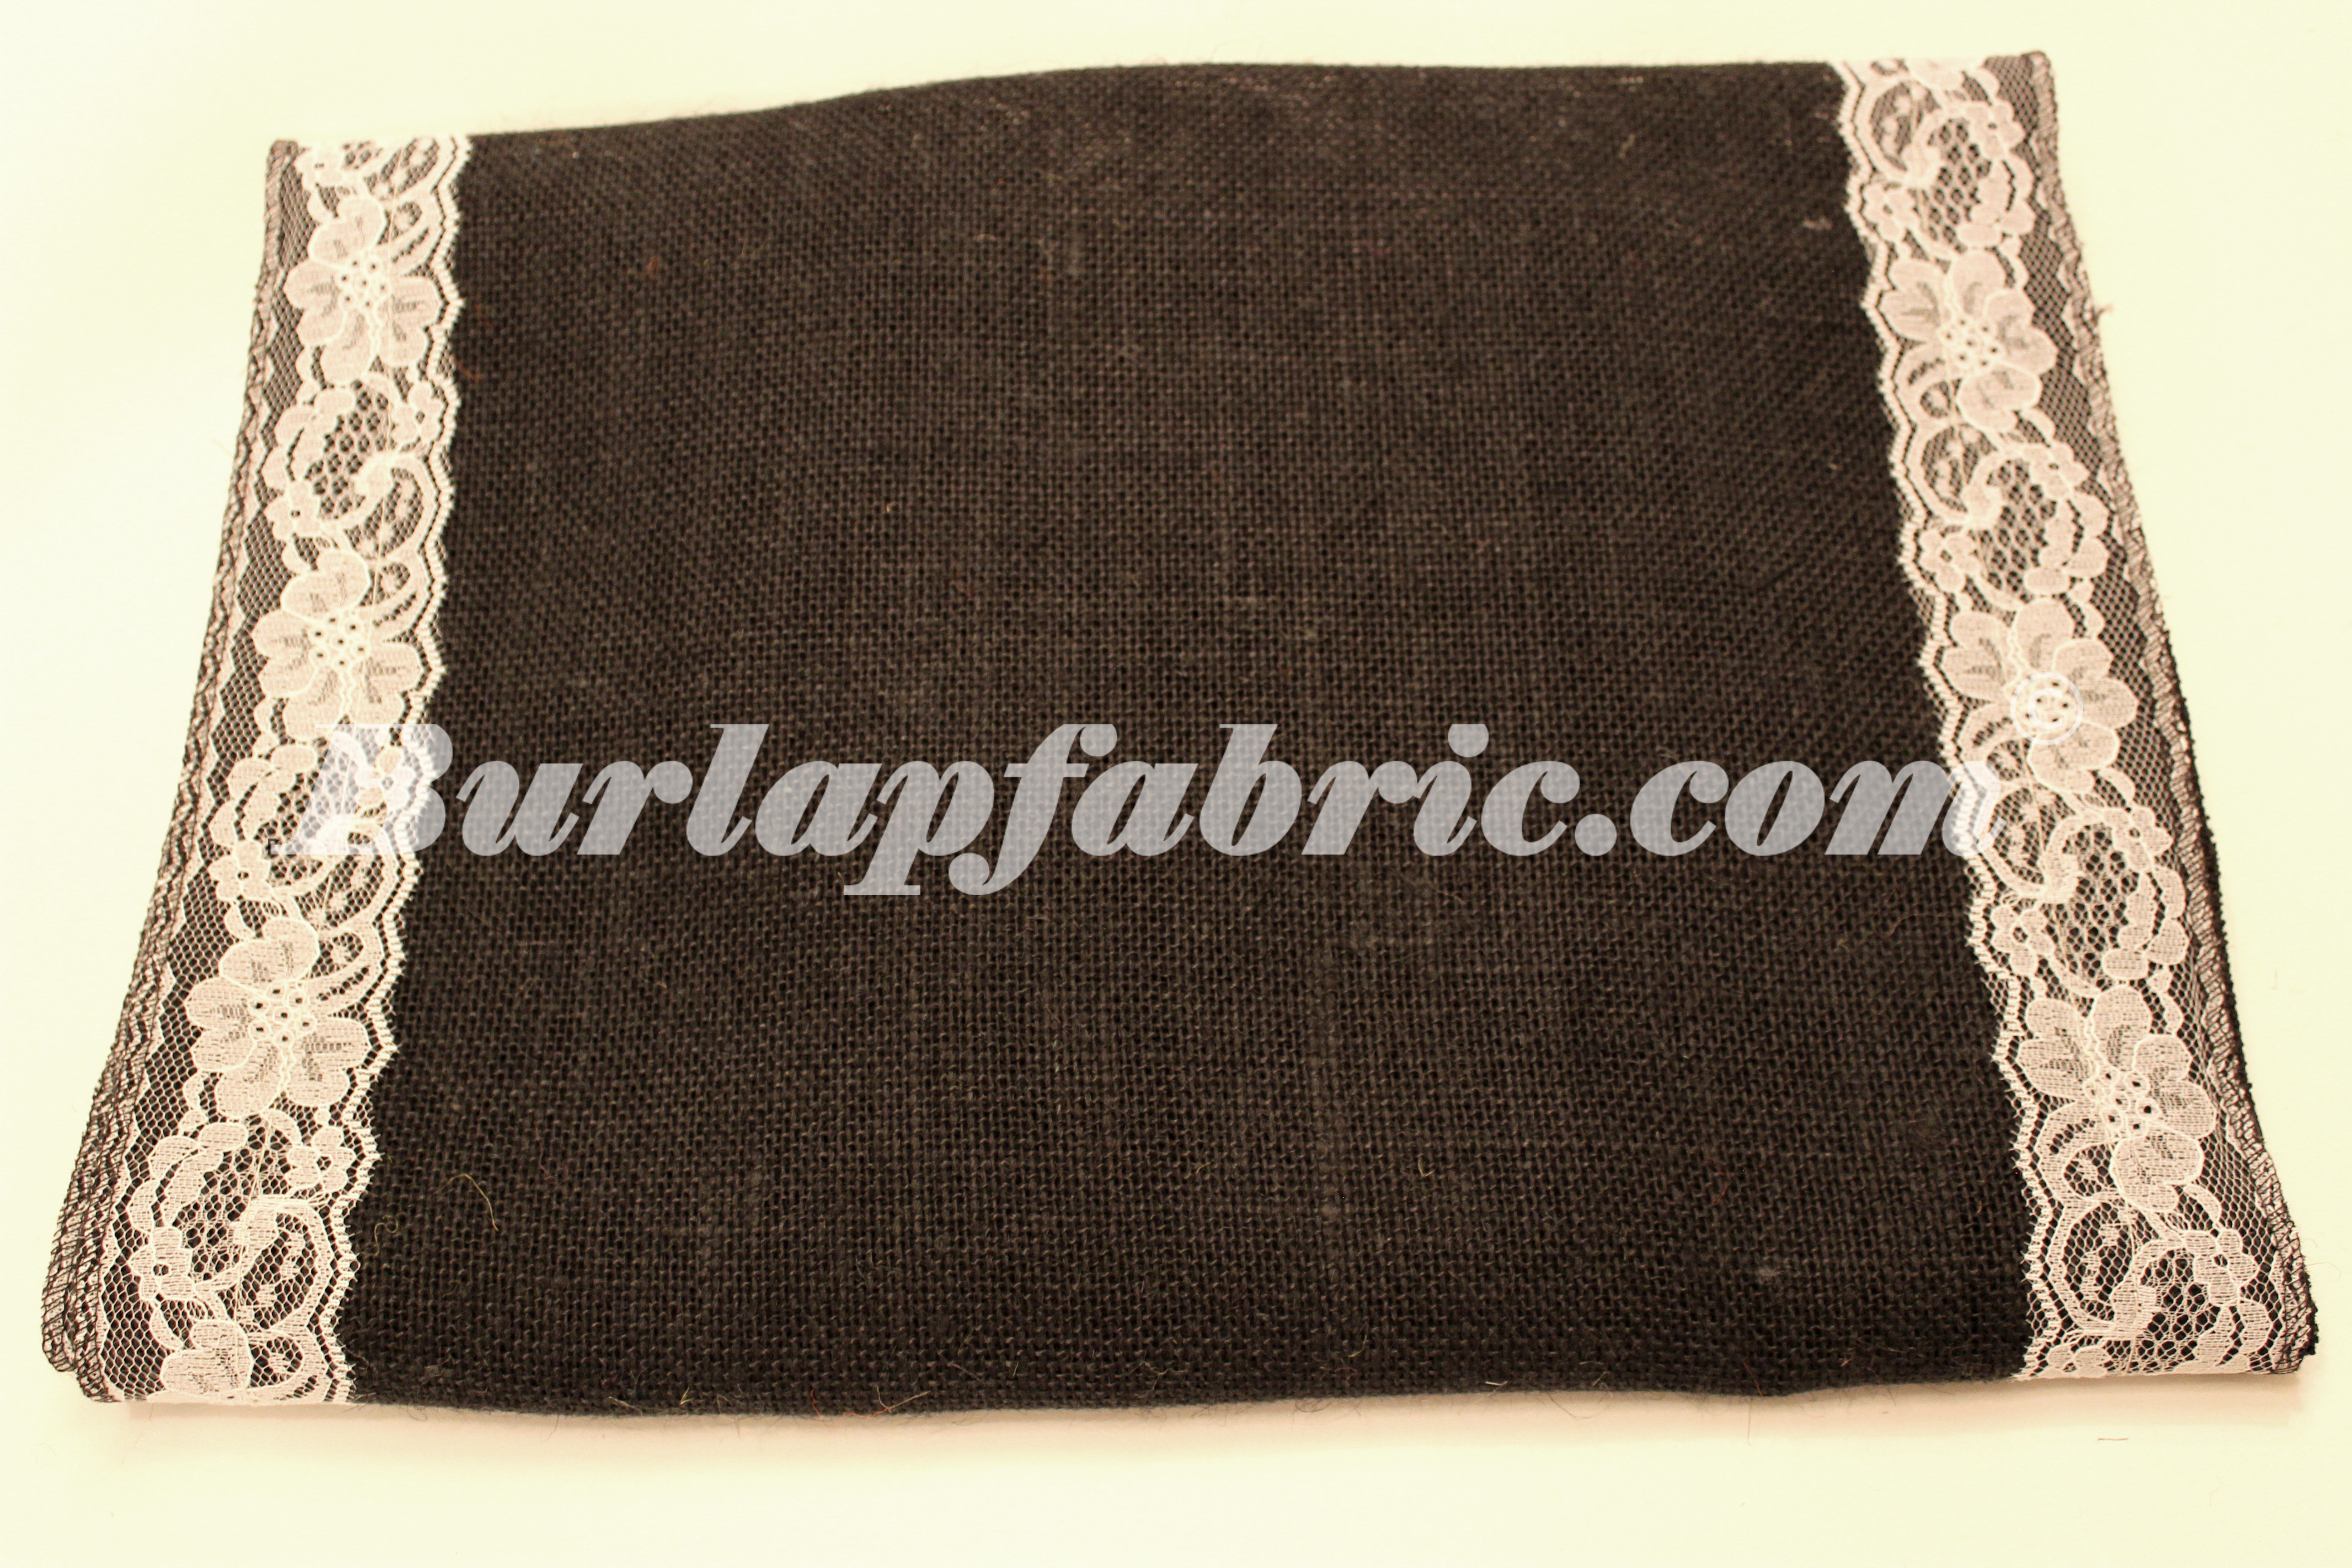 14" Black Burlap Runner with 2" White Lace Borders - Click Image to Close